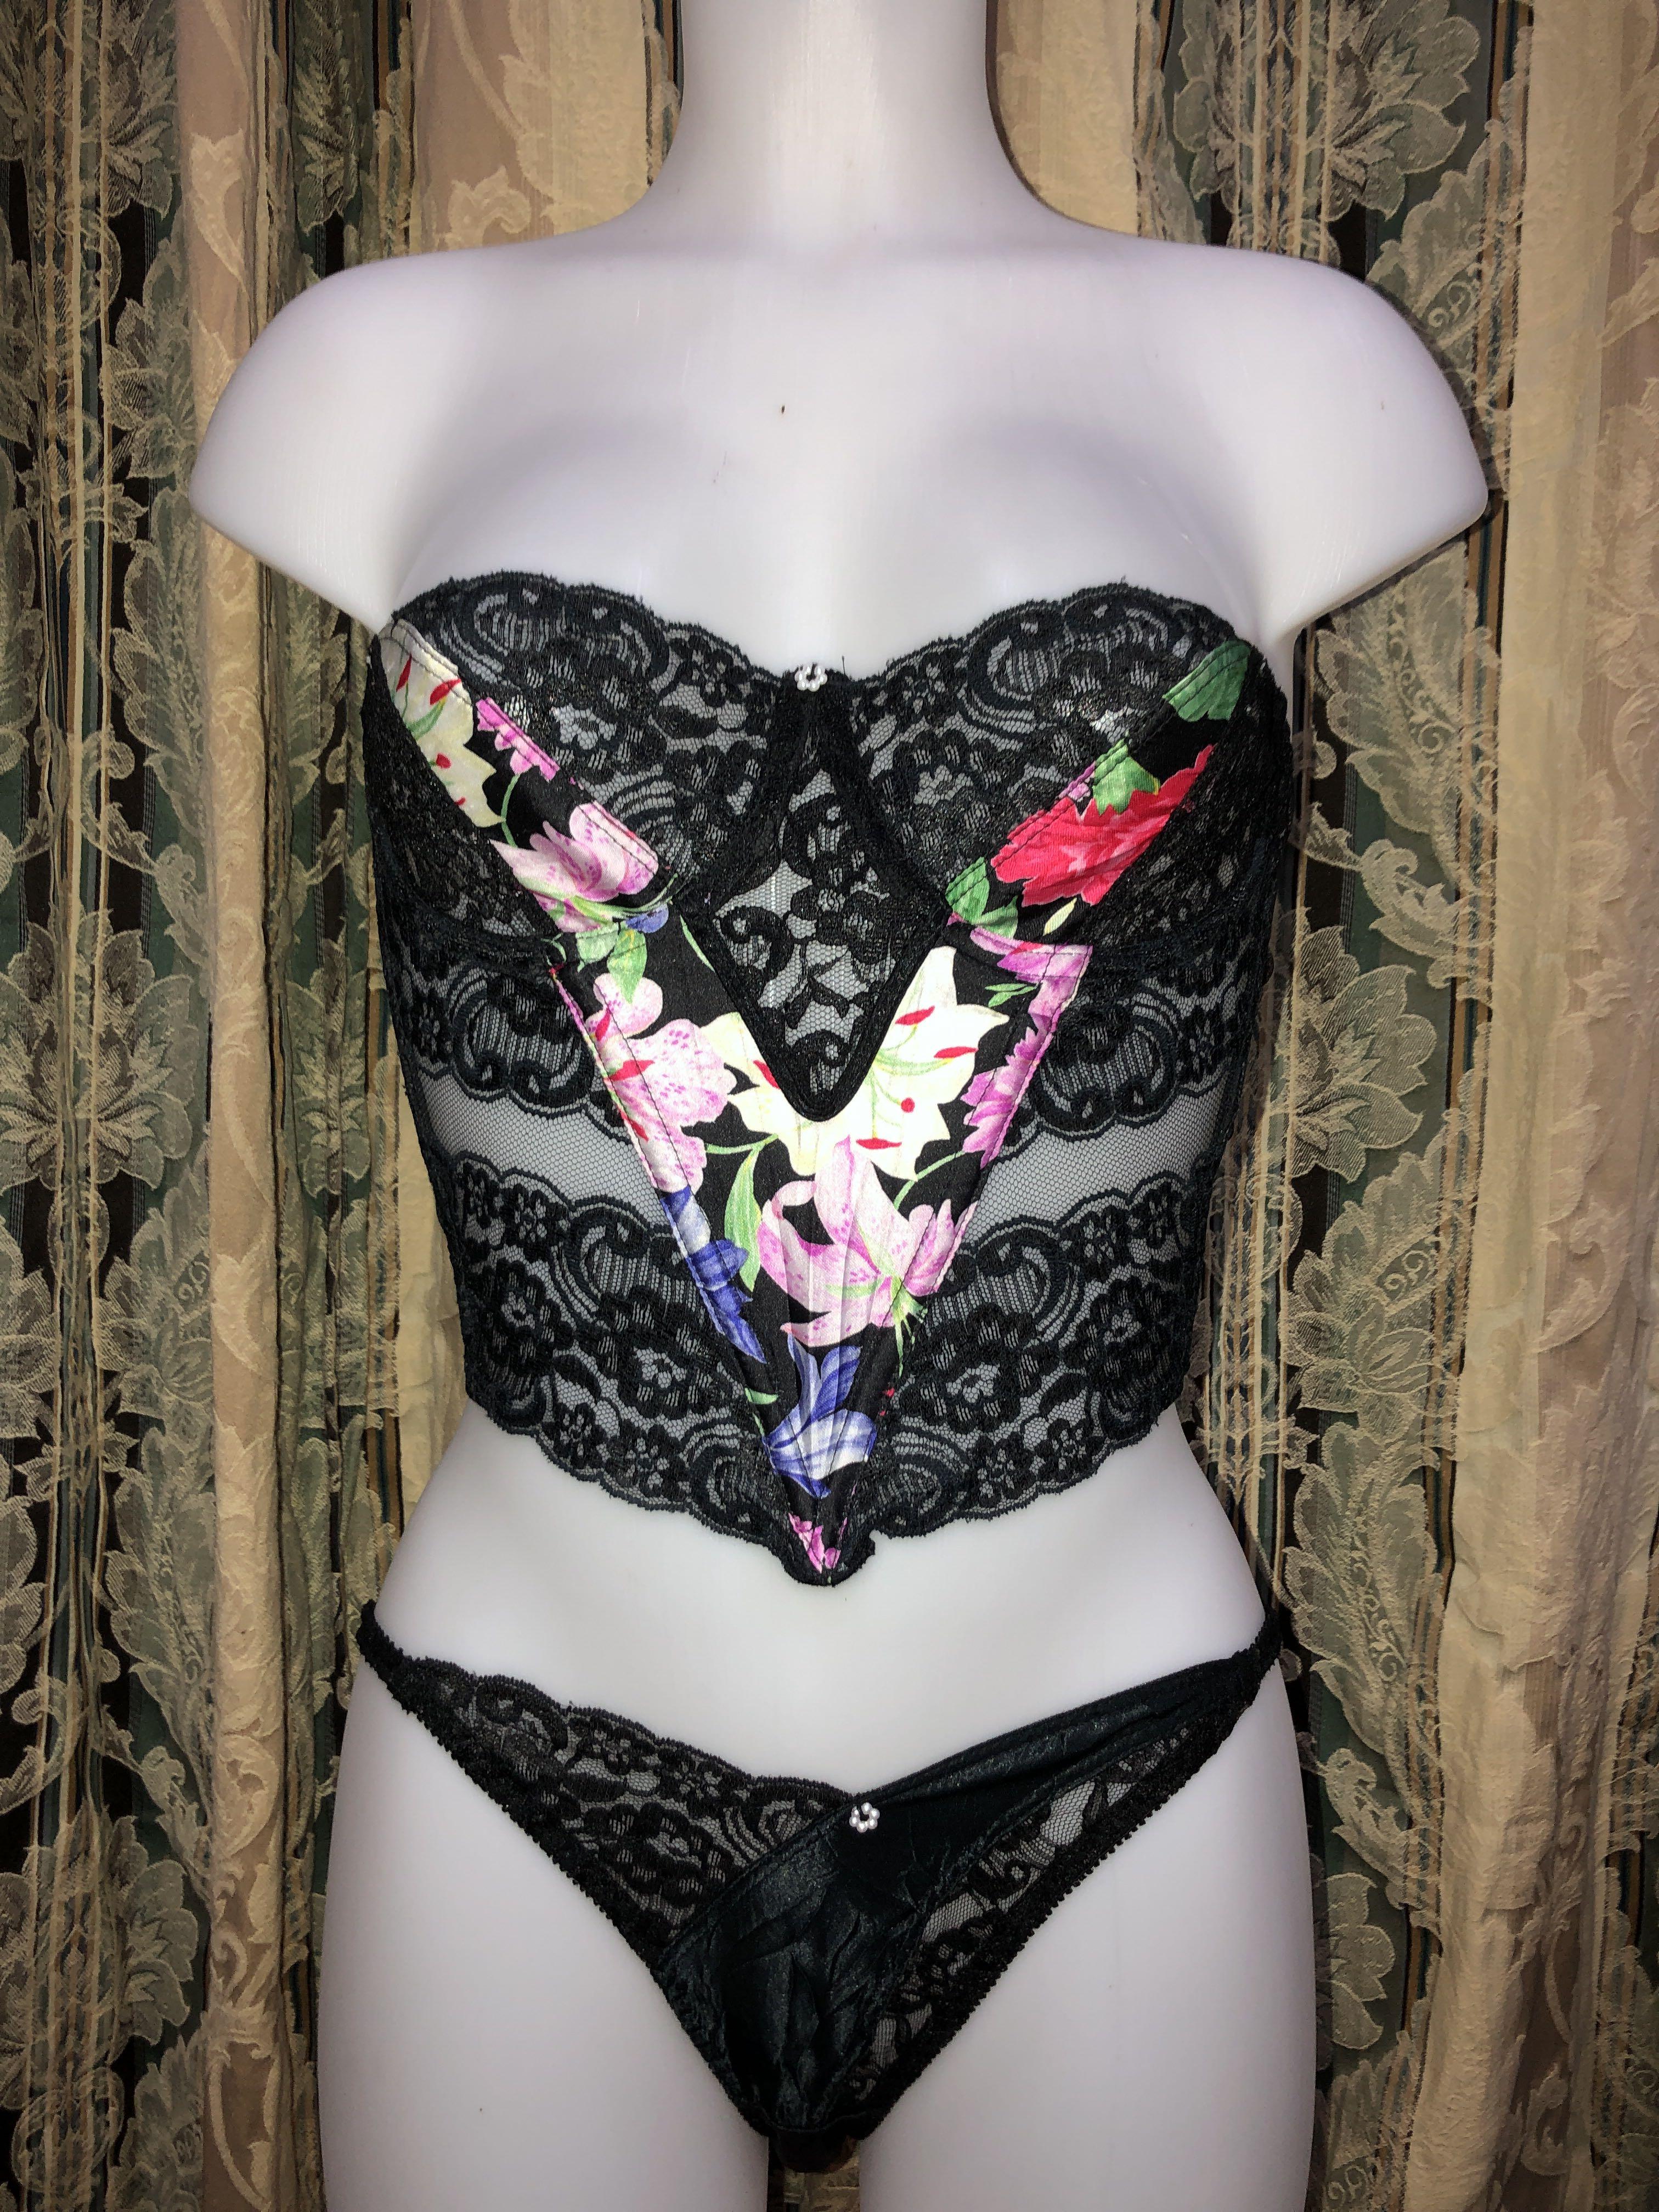 AUTH Christian Dior Intimates Black and Floral Bustier Corset with Undies  Set [Authentic / Legit] [VTG / Vintage], Luxury, Apparel on Carousell